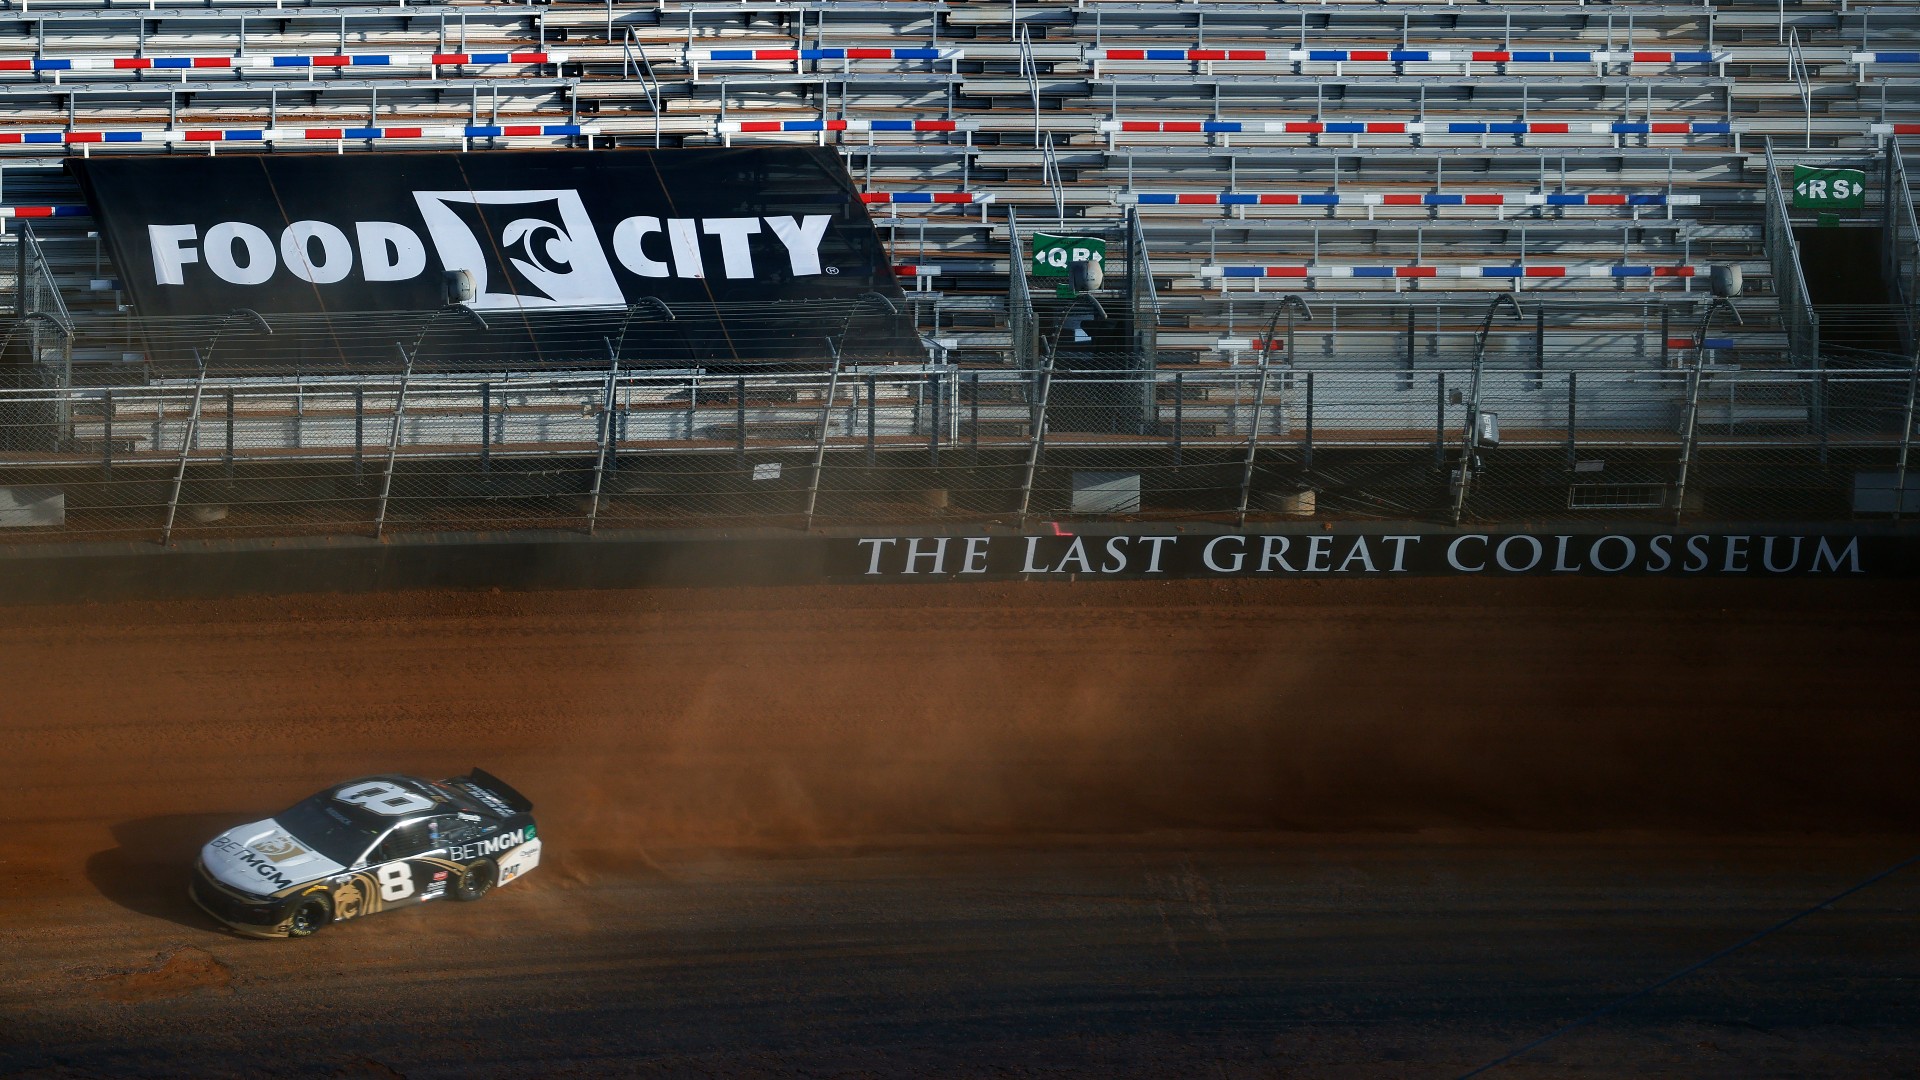 NASCAR Live Race Update, Results, Highlights from Food City Dirt ...